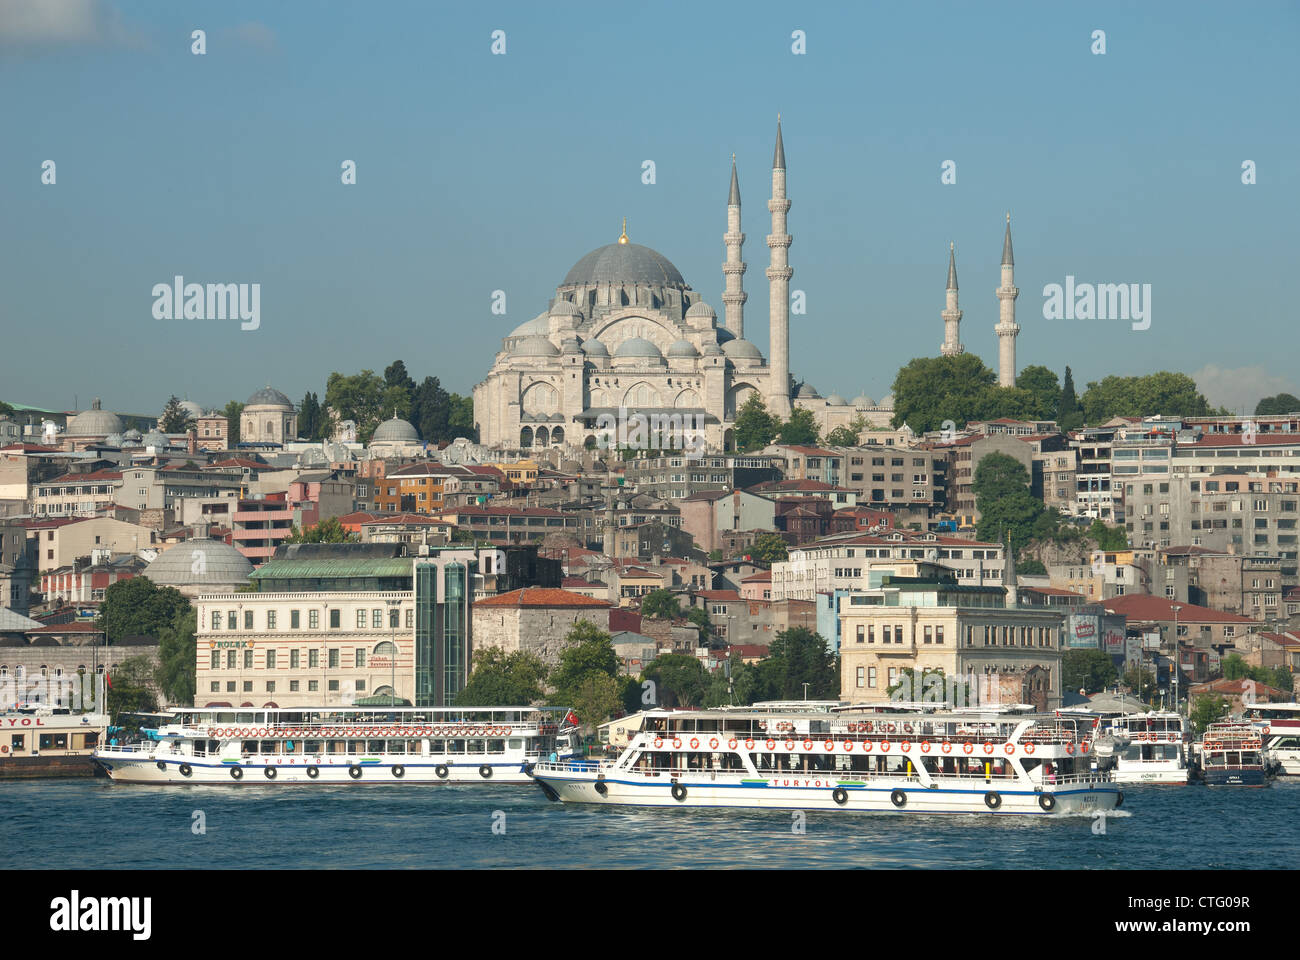 ISTANBUL, TURKEY. Bosphorus ferries on the Golden Horn, with the Suleymaniye mosque dominating the skyline. 2012. Stock Photo